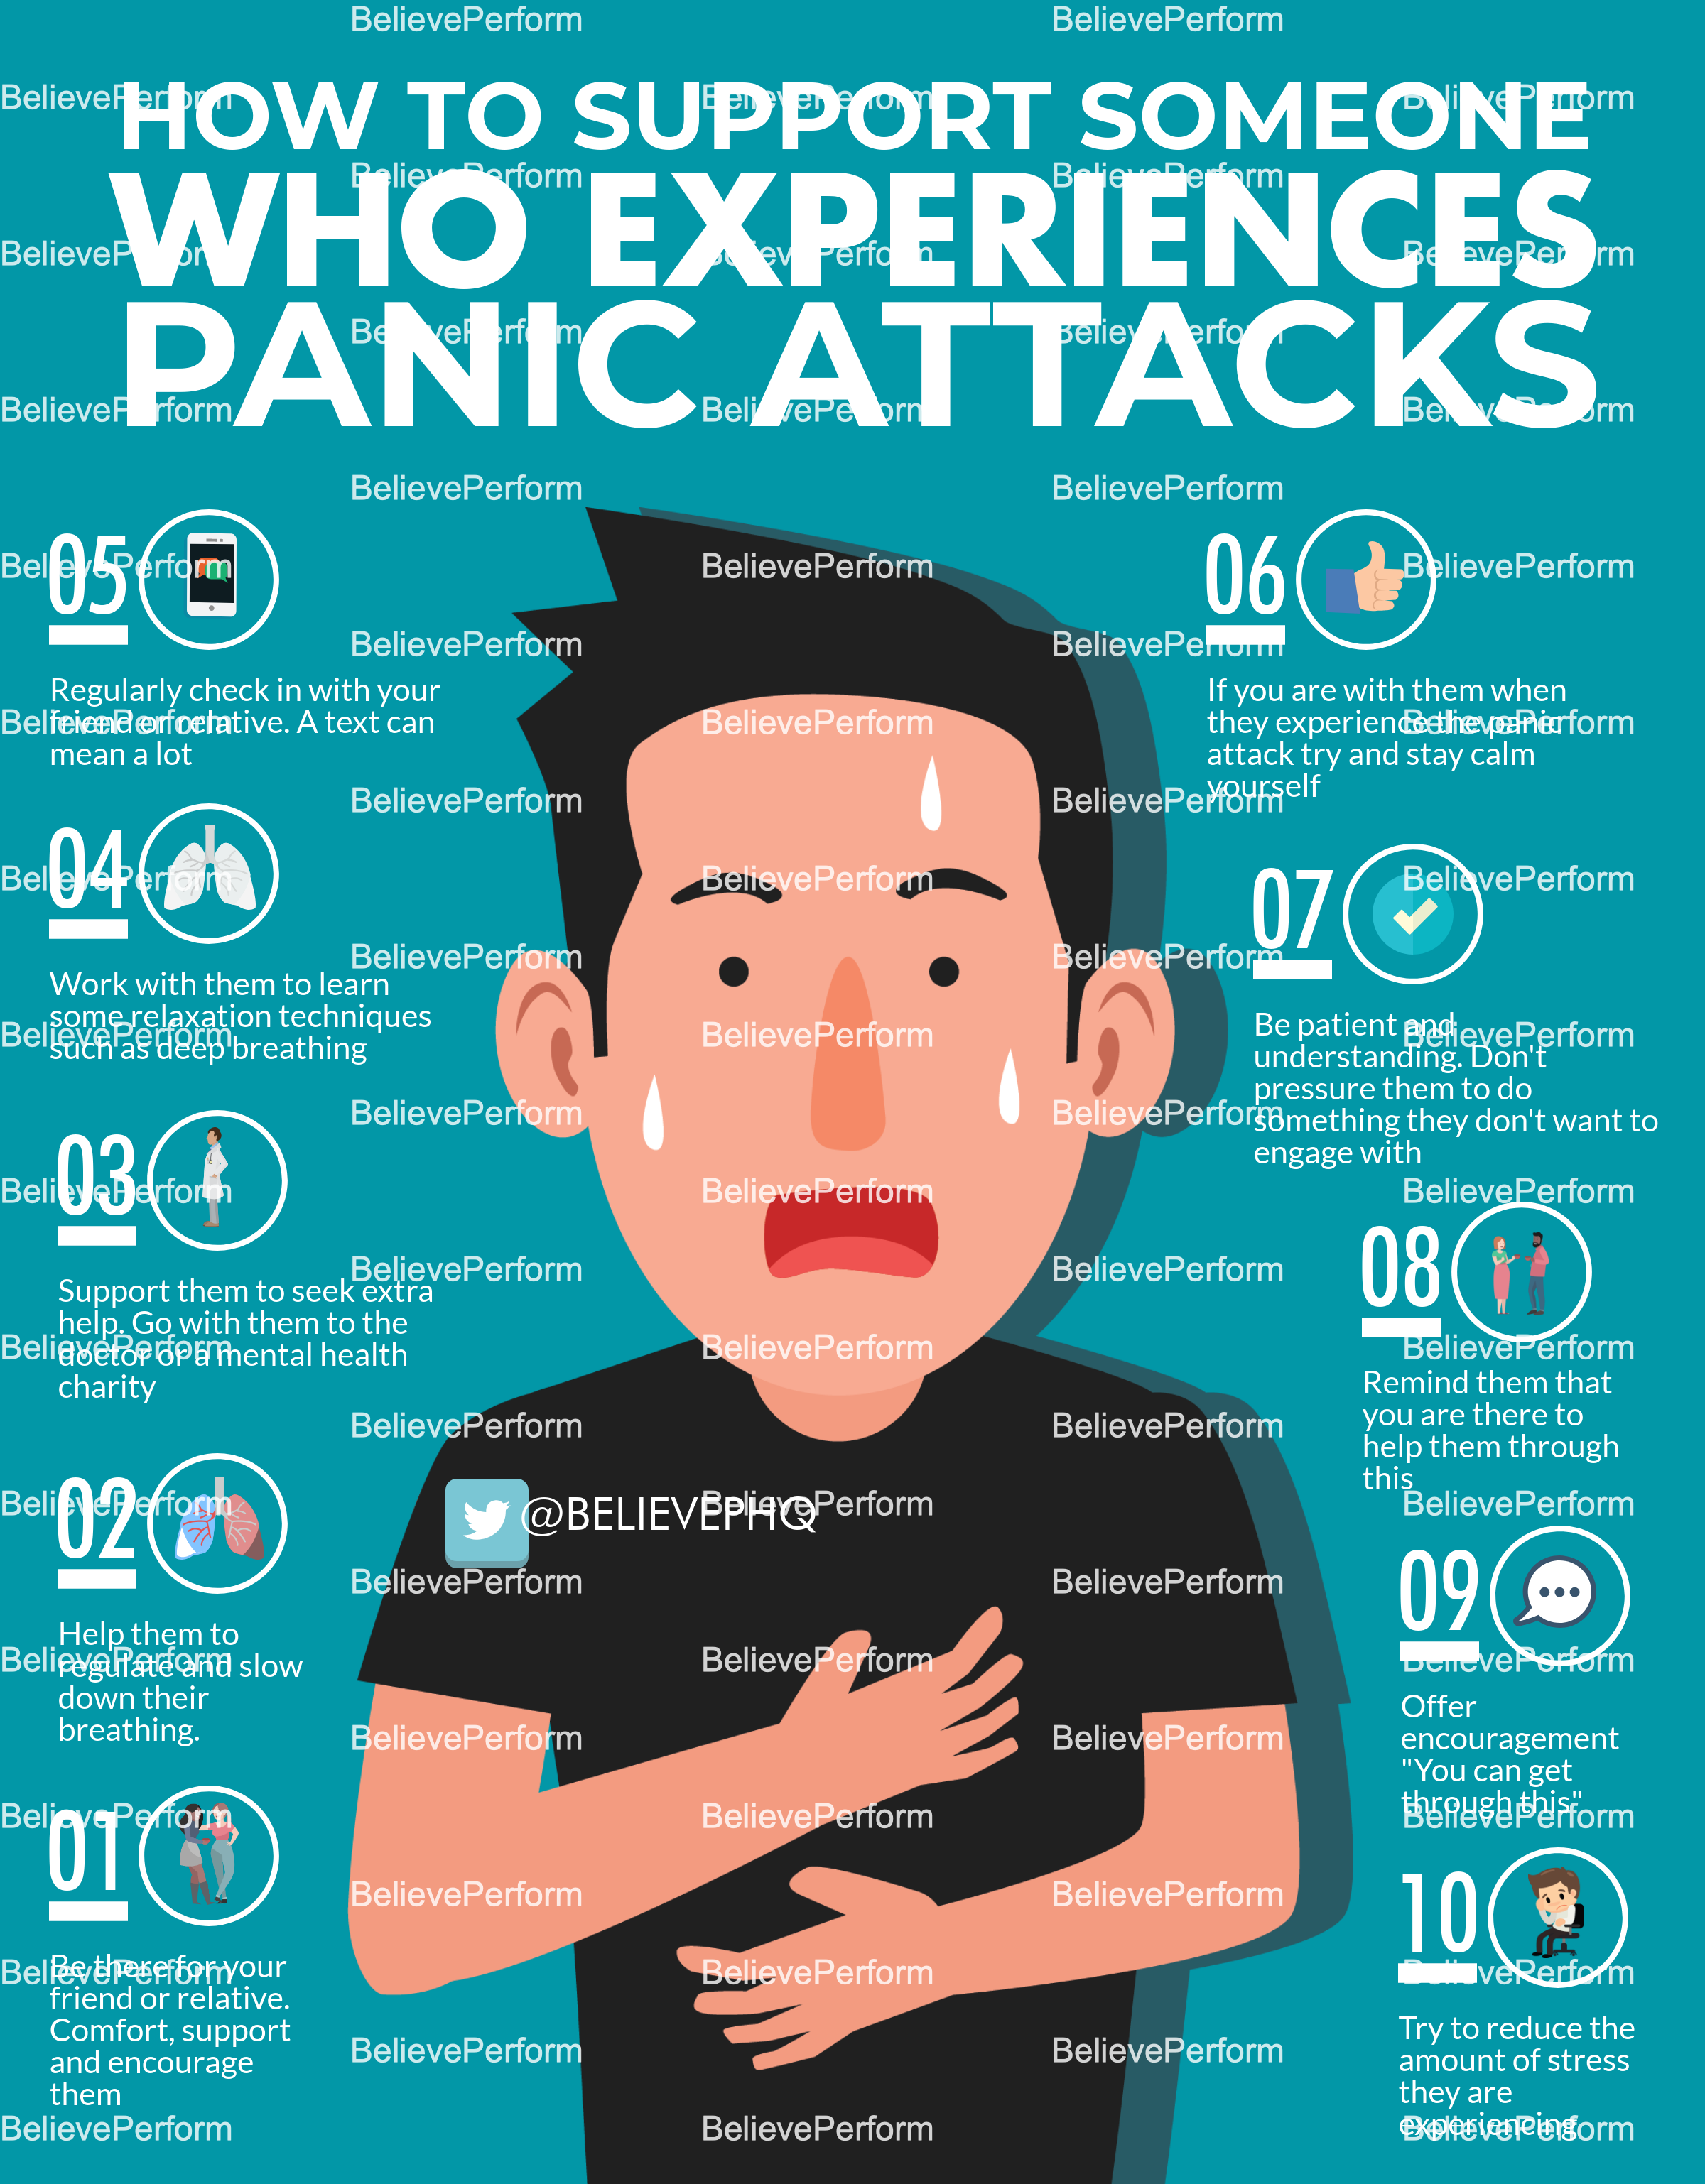 How to support someone who experiences panic attacks